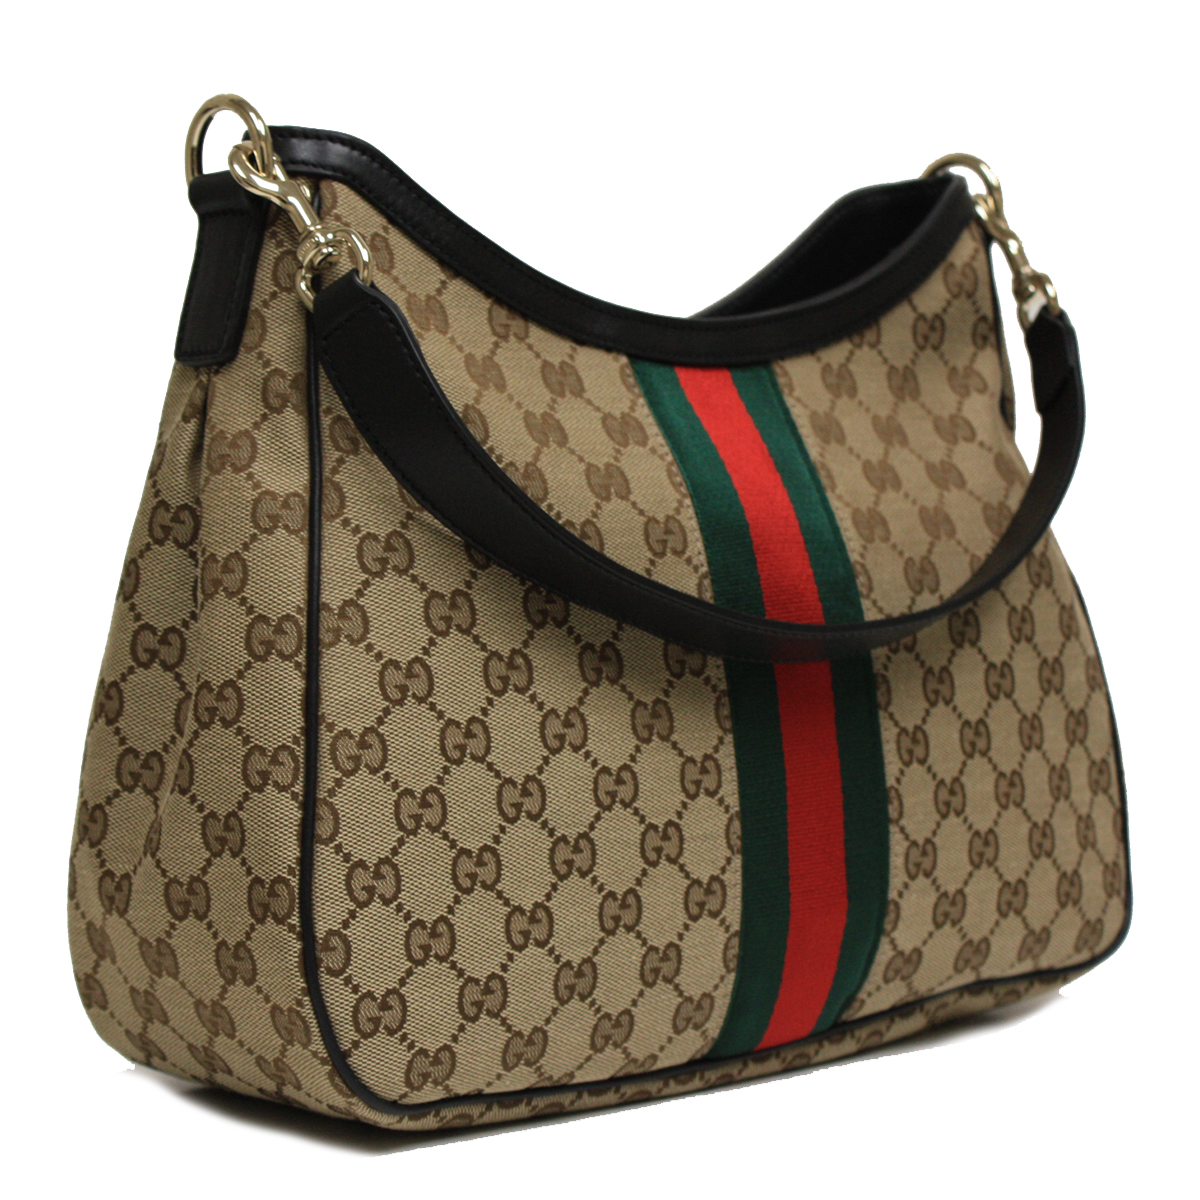 Gucci Bags in India | Buy & Sell Pre-owned Gucci Handbags, Shoes,  Accessories for Women and Men